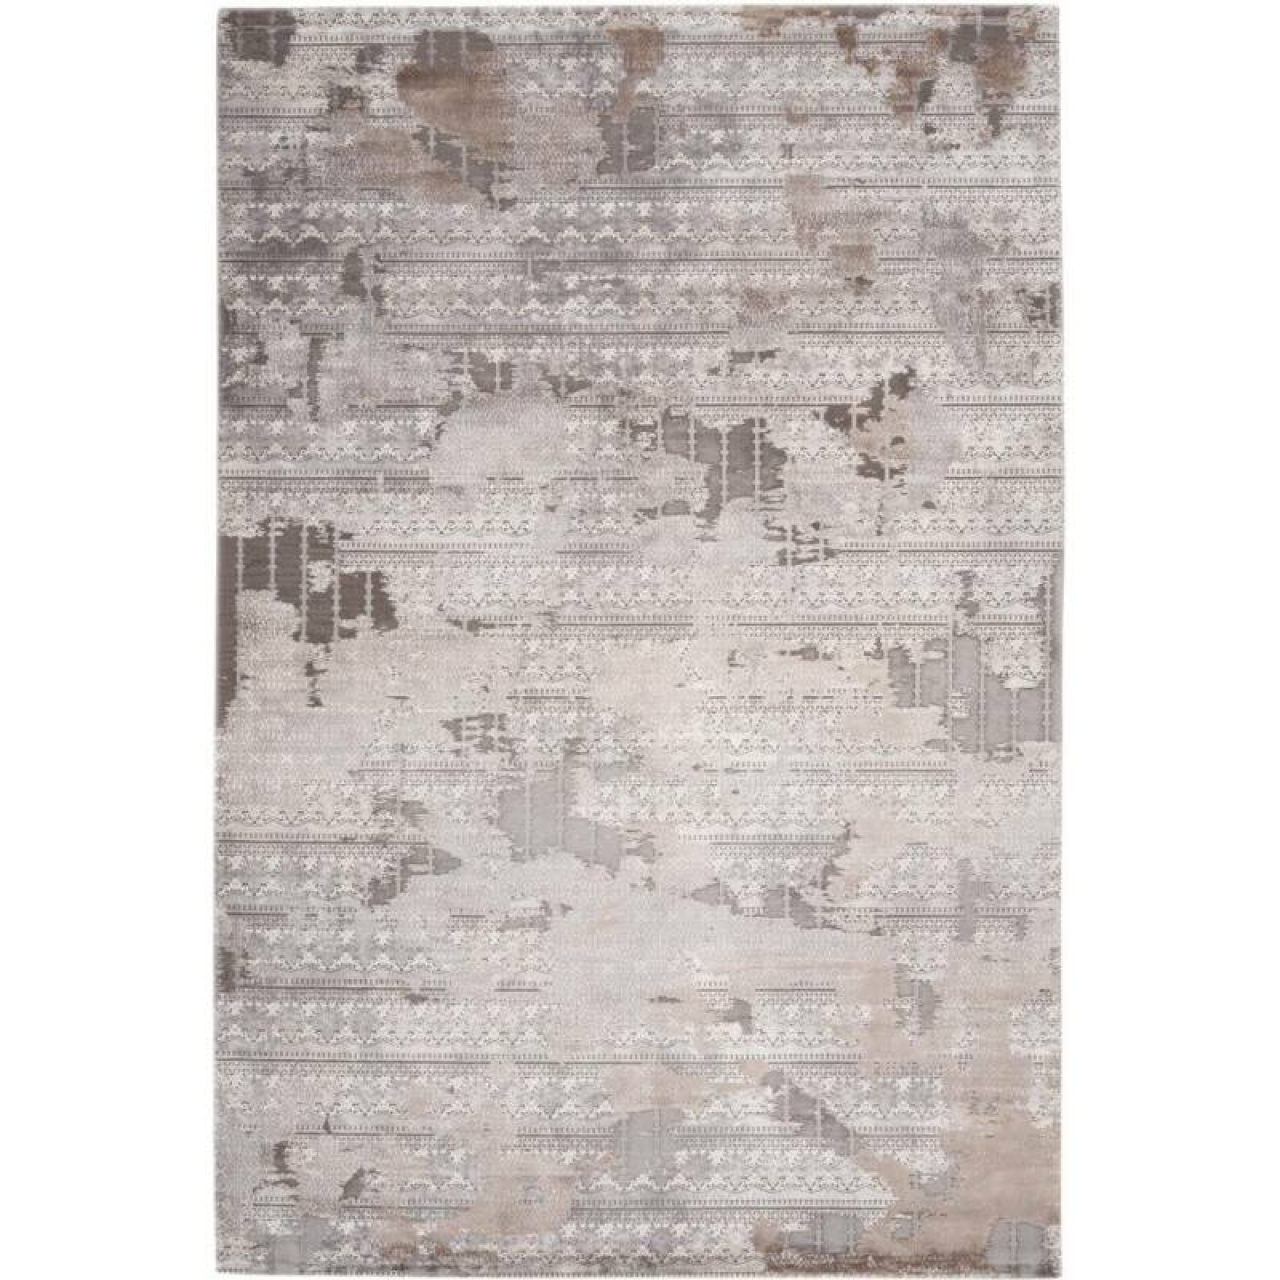 Obsession Haute Couture Jewel 955 Taupe szőnyeg-200x290